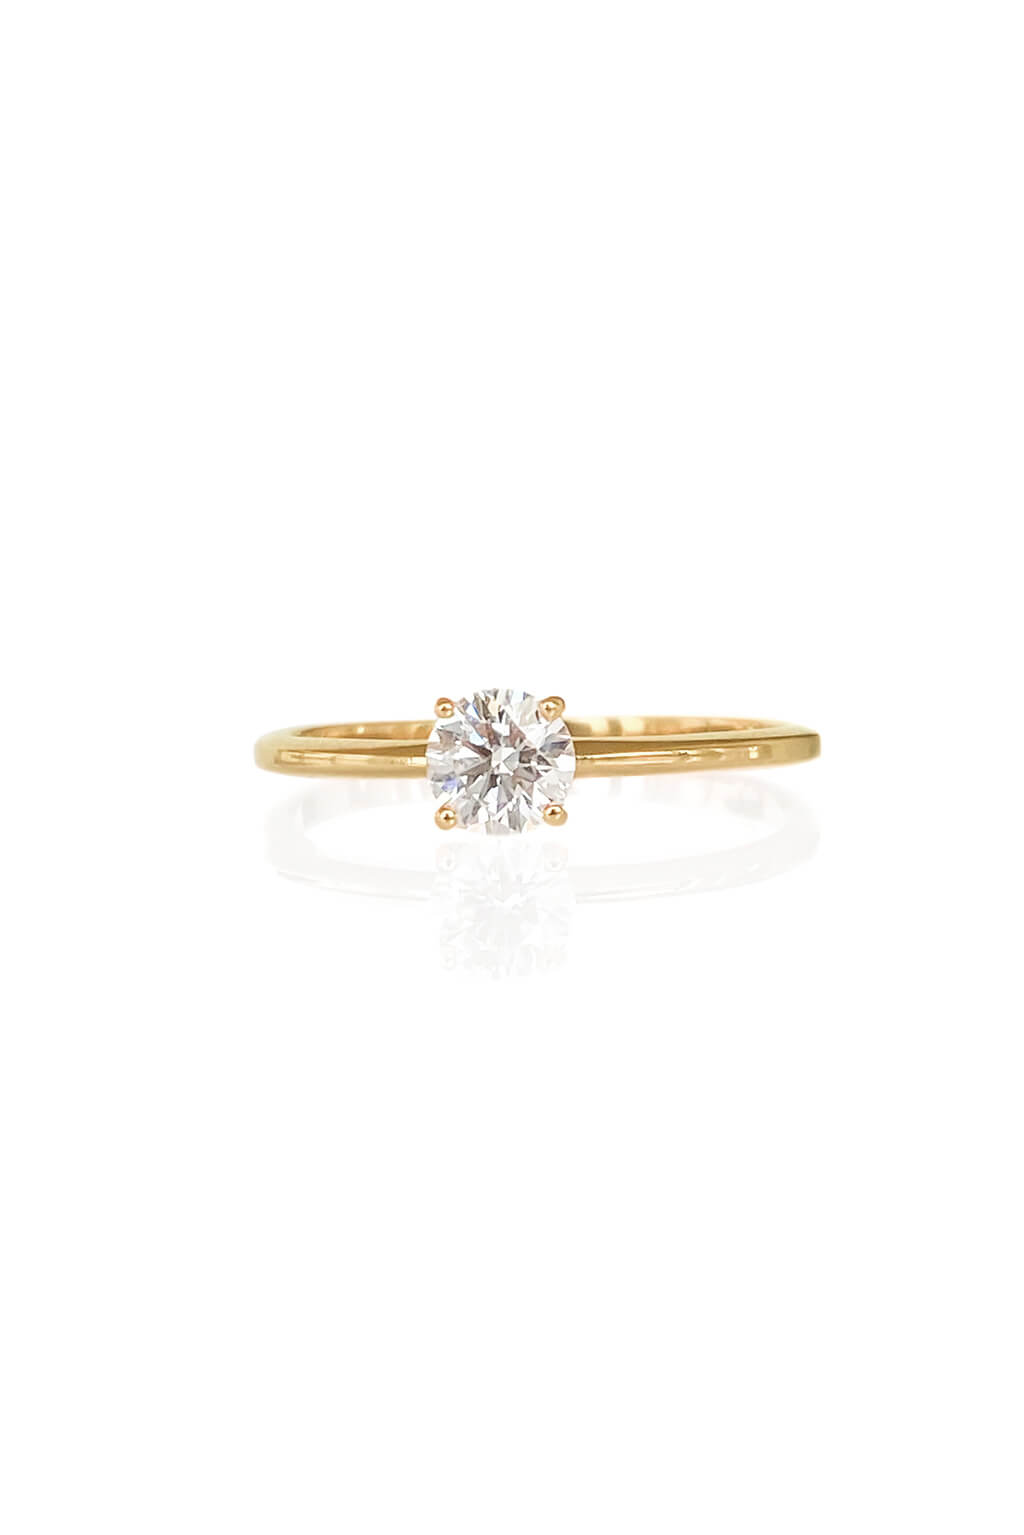 4'5 mm diamond solitaire gold ring